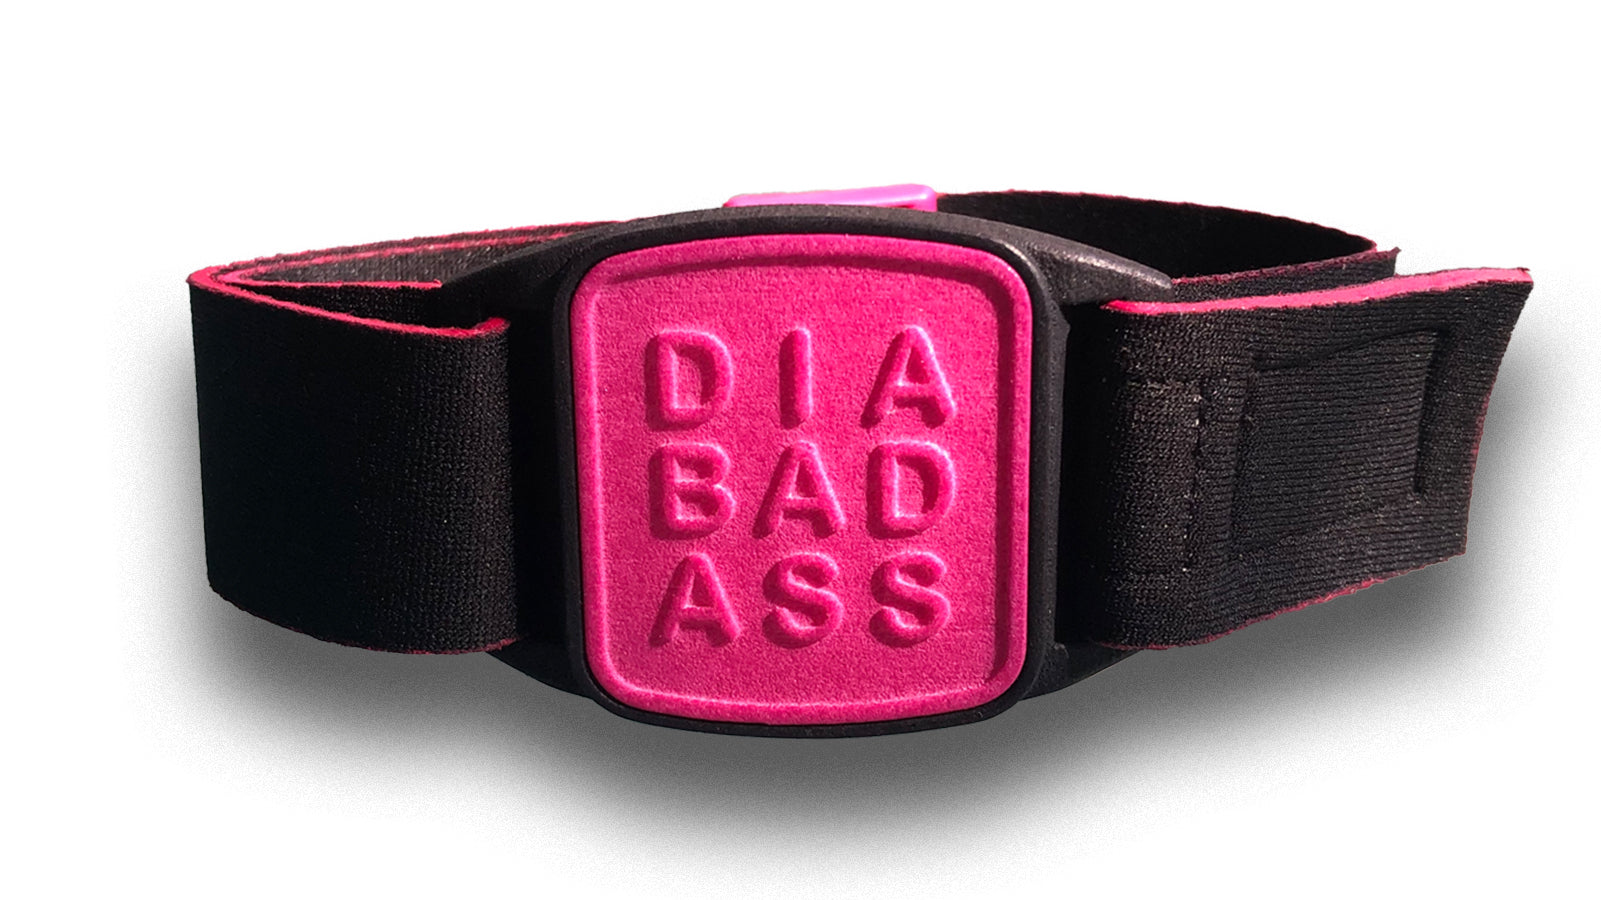 Dexband armband in magenta with DIABADASS cover.